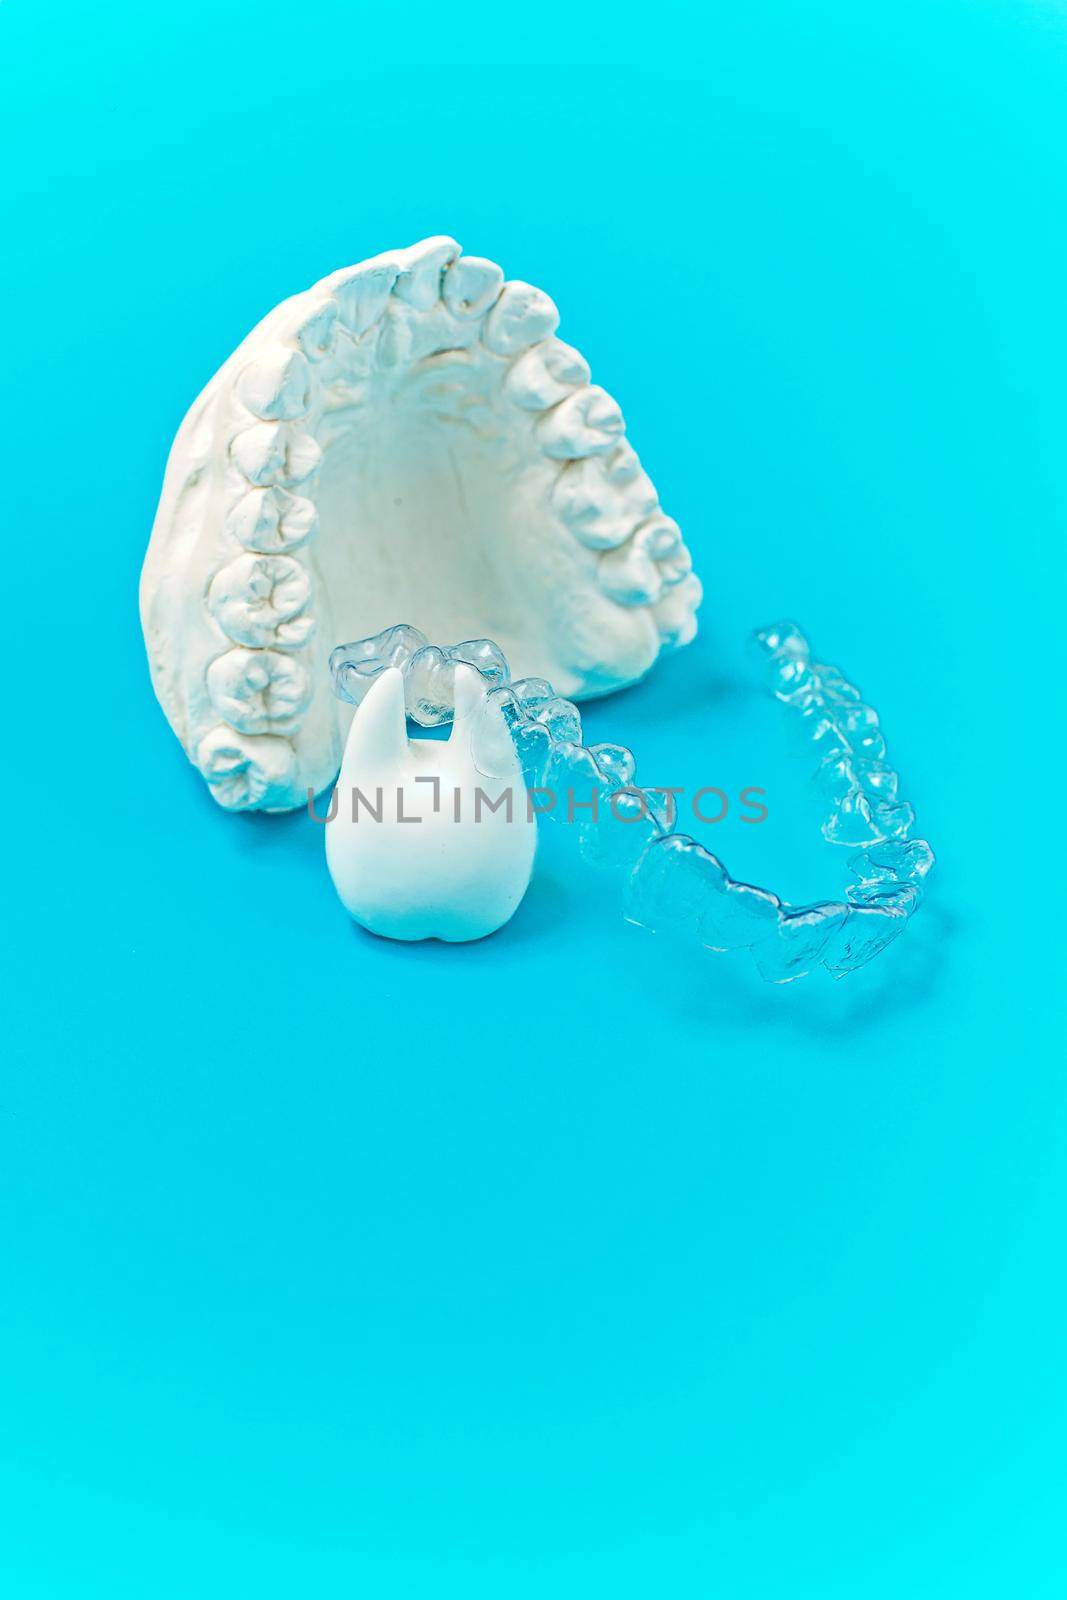 Orthodontic dental theme on blue background. Transparent invisible dental aligners or braces aplicable for an orthodontic dental treatment by Maximusnd